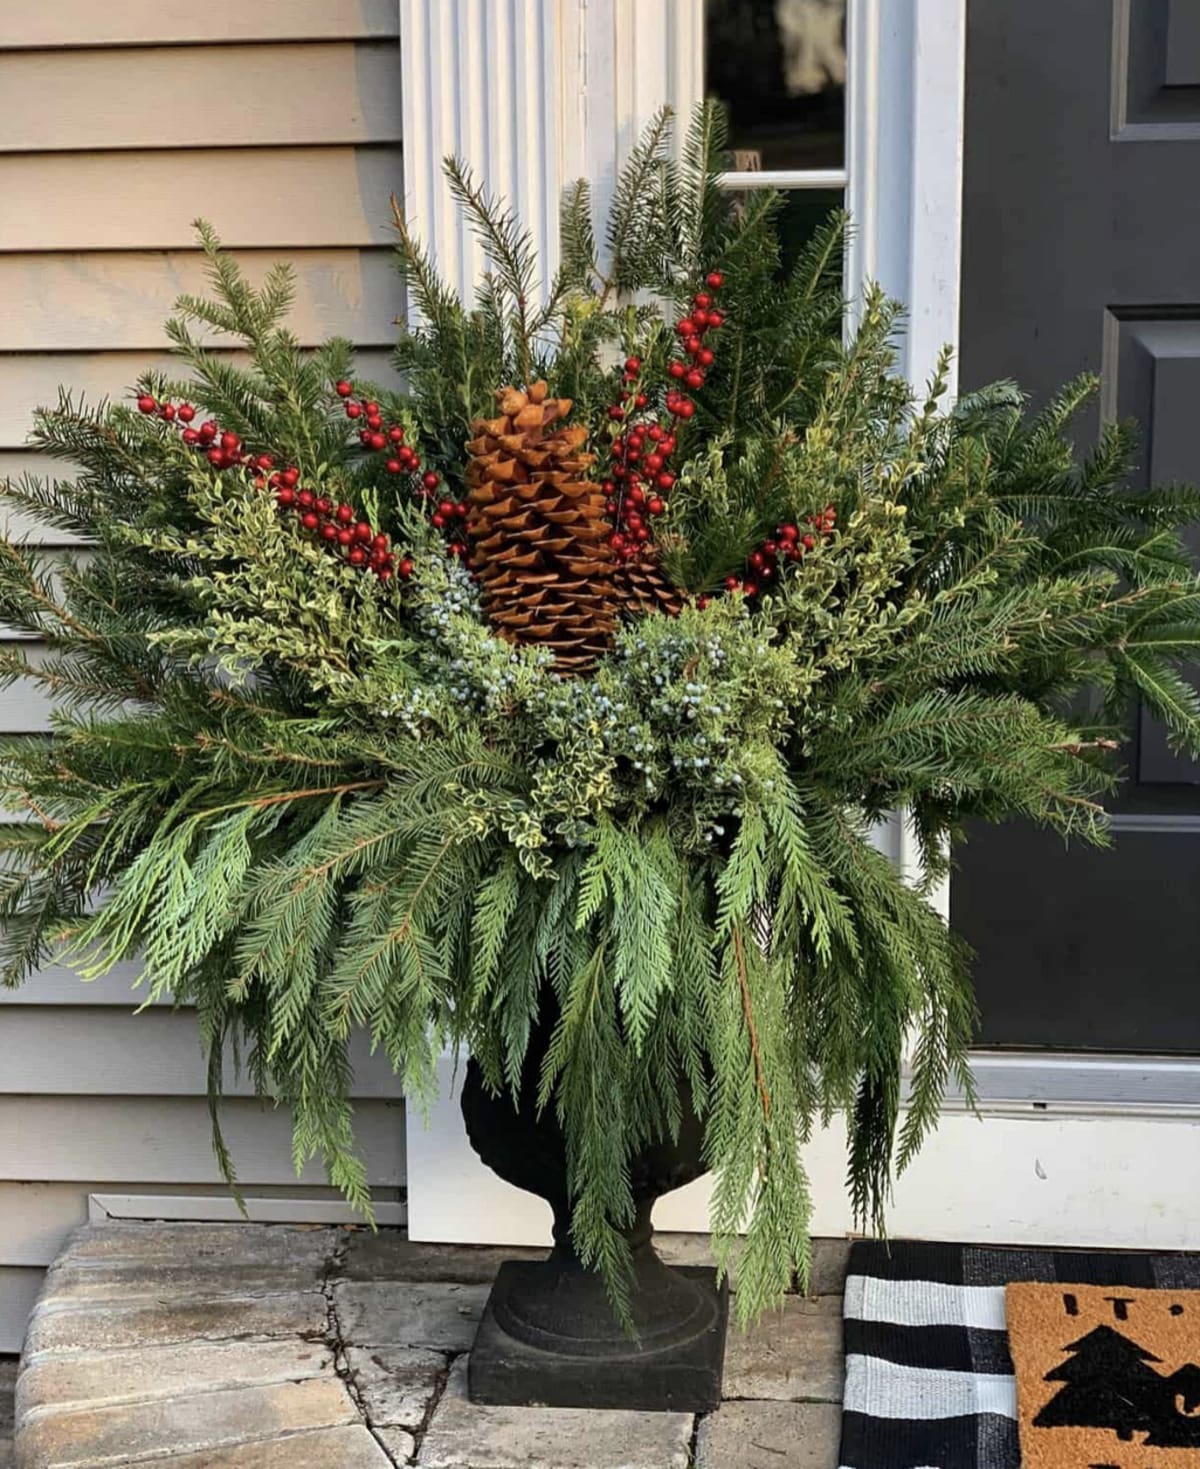 christmas greenery arranged in a winter planter with red berries and a large pine cone